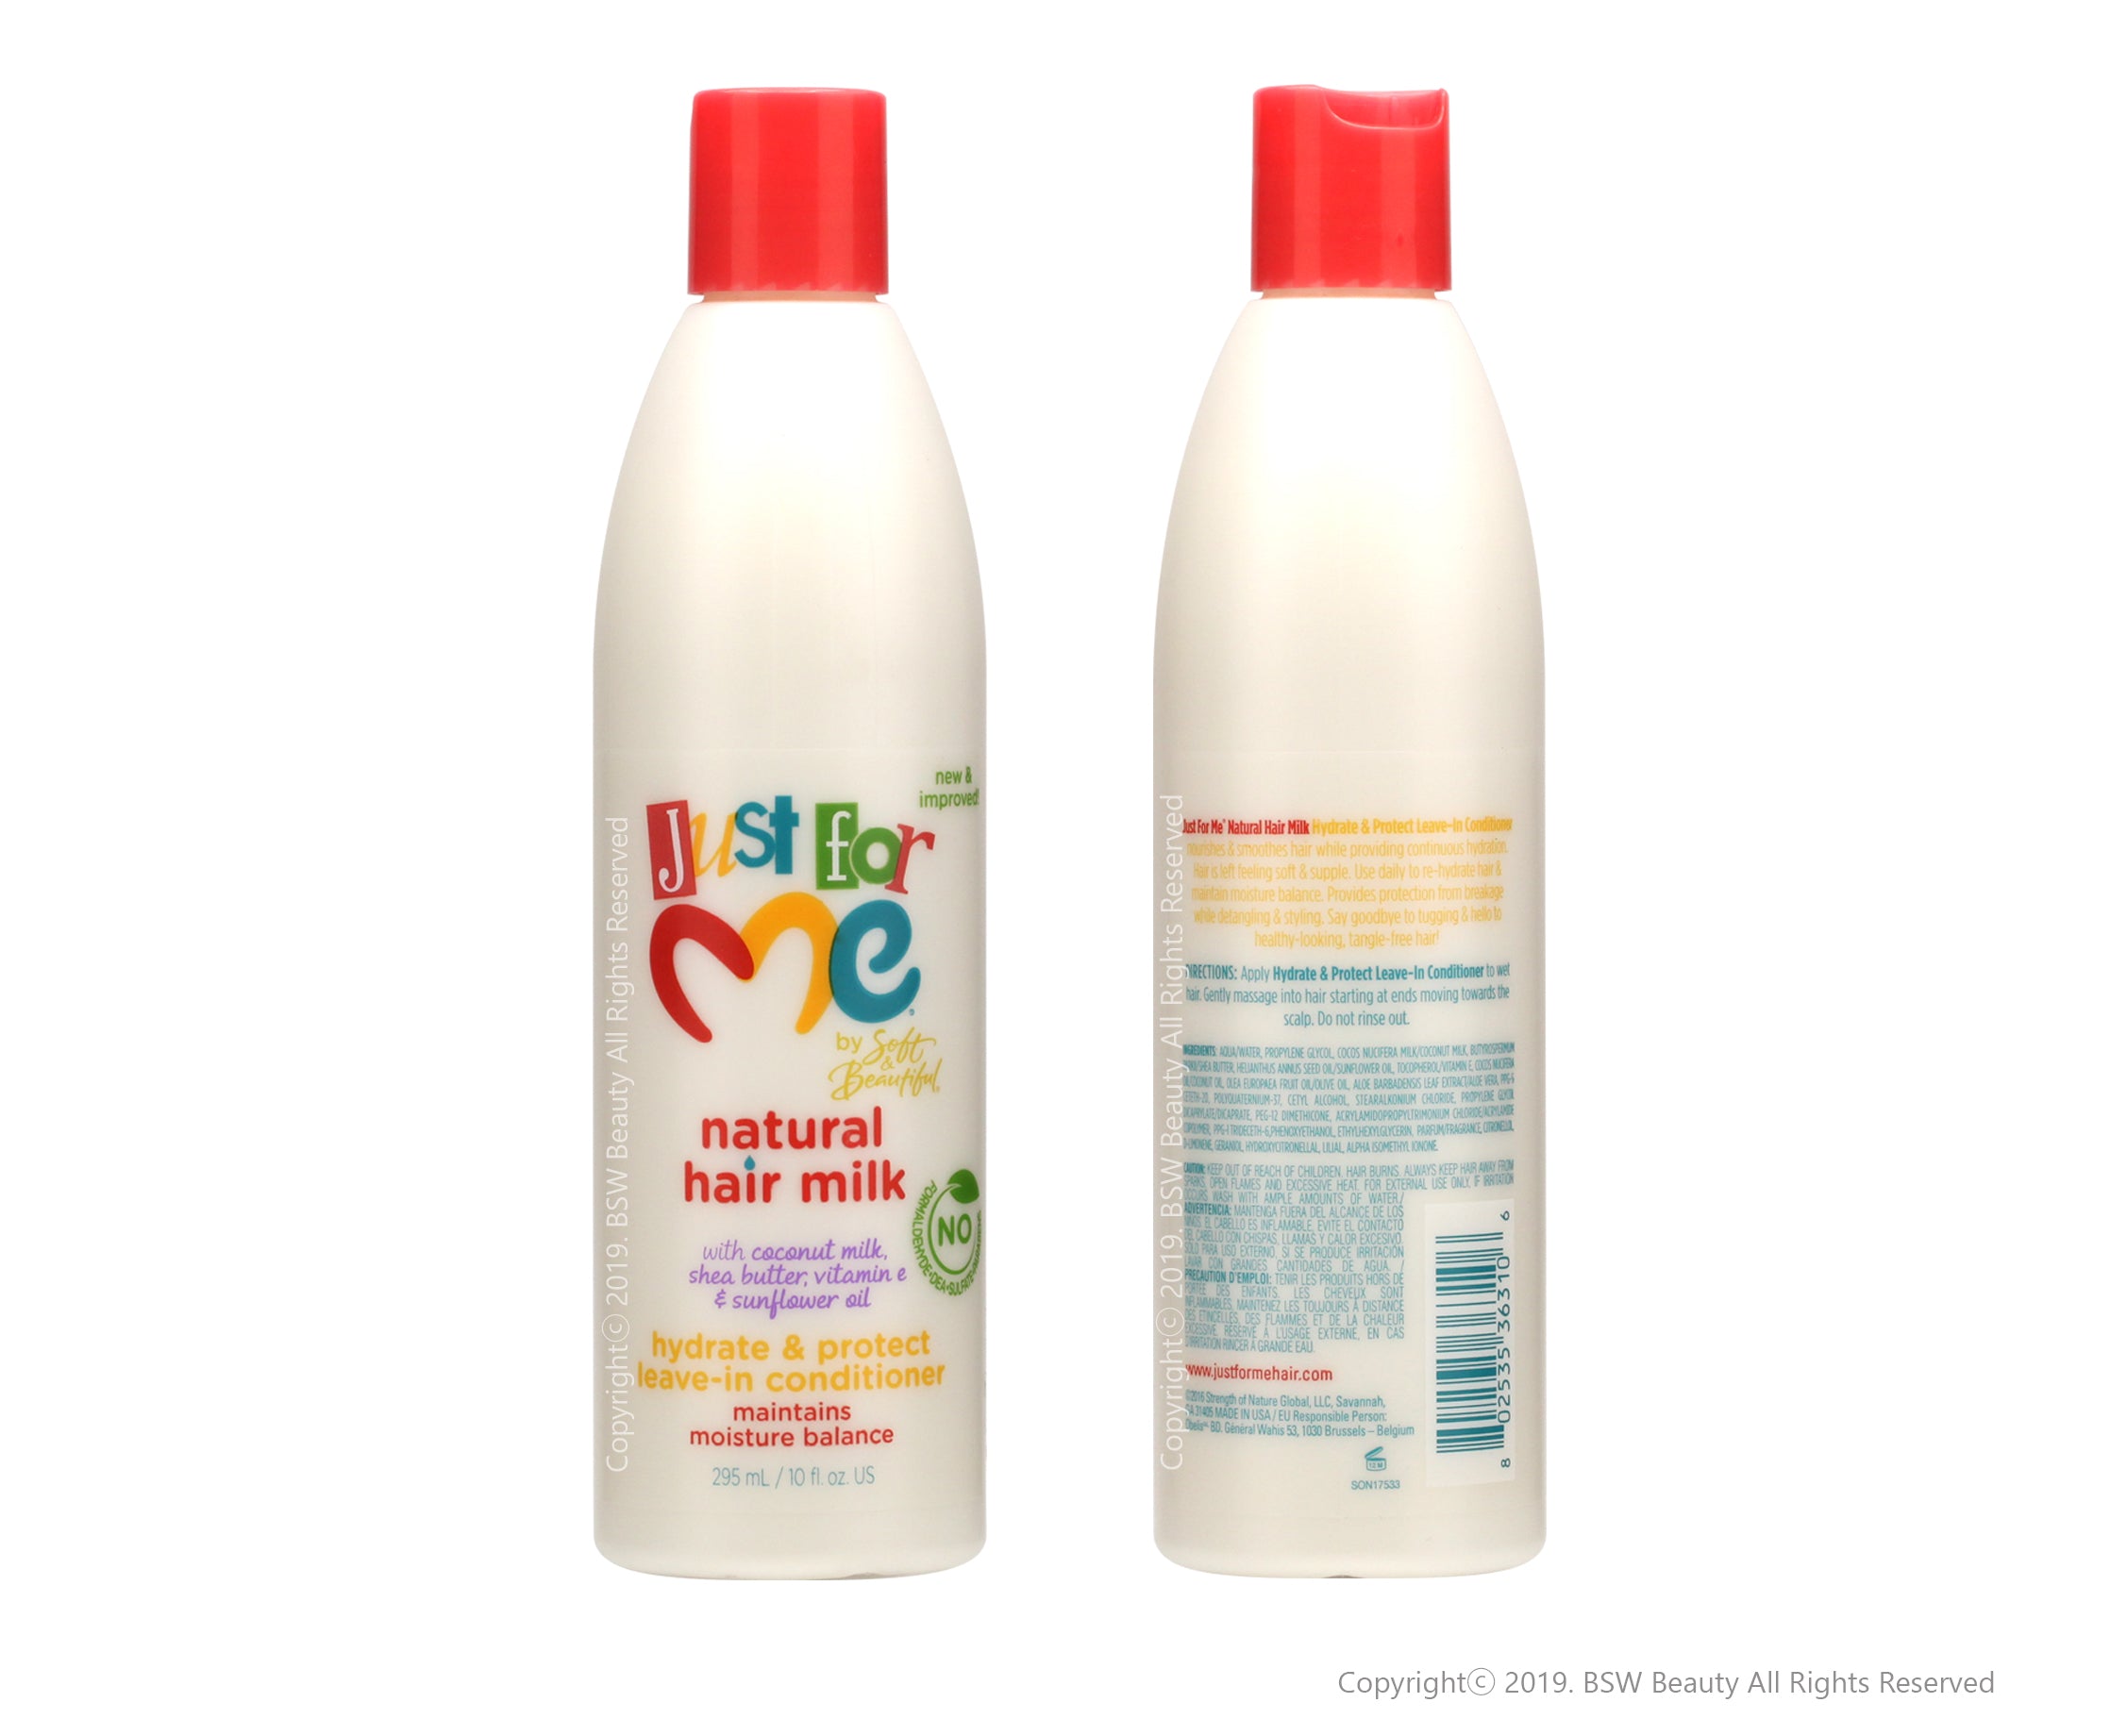 JUST FOR ME NATURAL HAIR MILK HYDRATE & PROTECT LEAVE-IN CONDITIONER 10oz